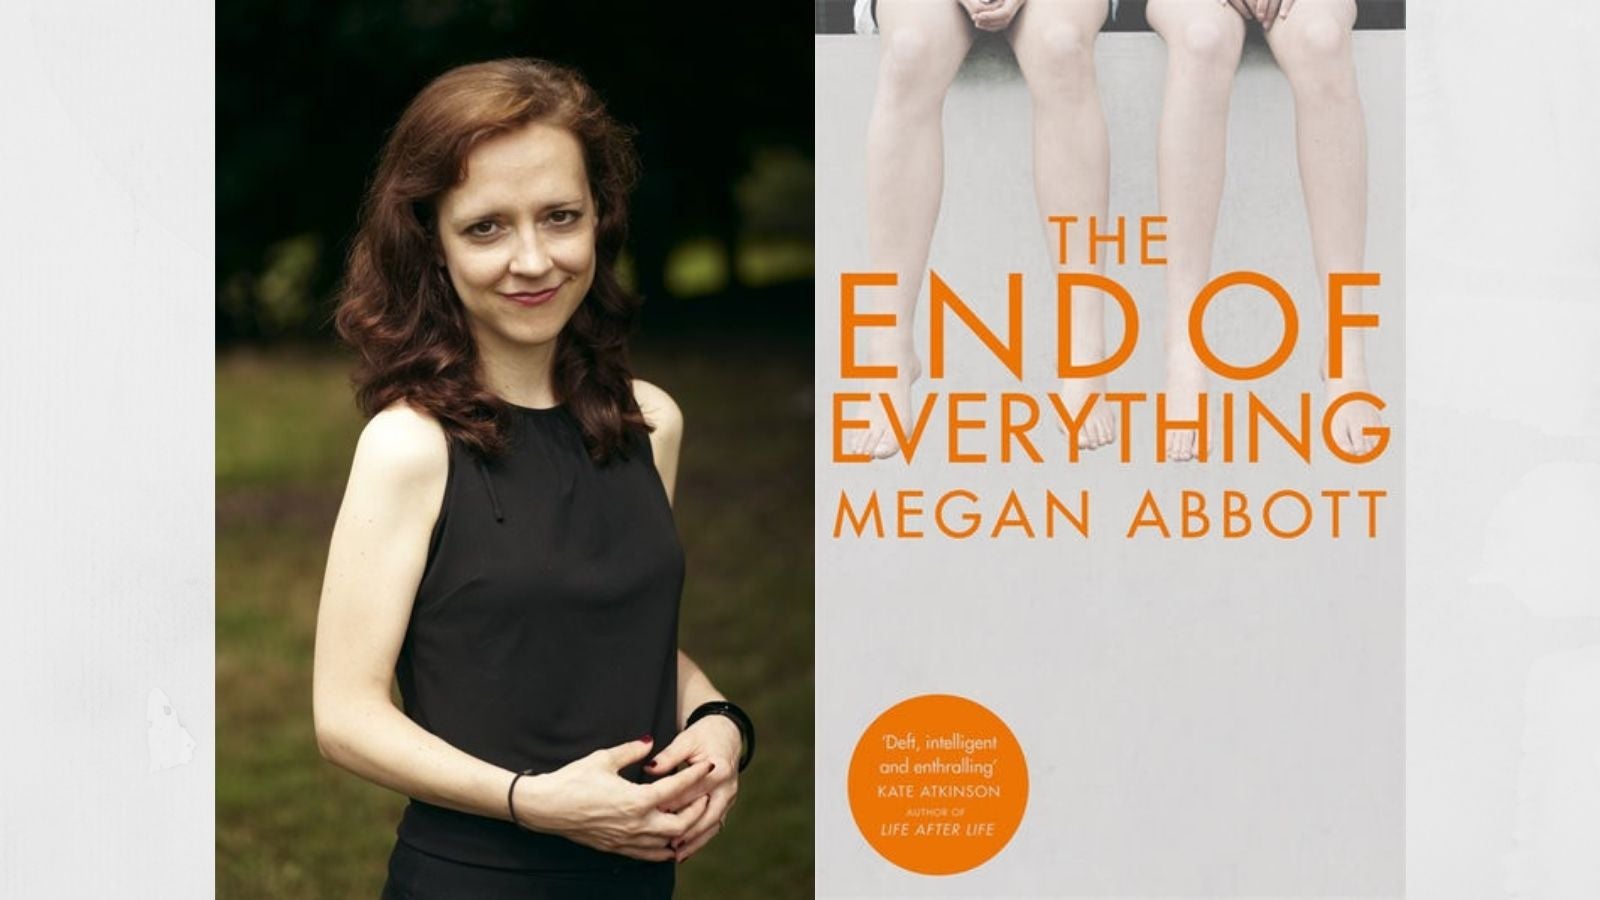 Megan Abbott author photo and book cover for The End of Everything